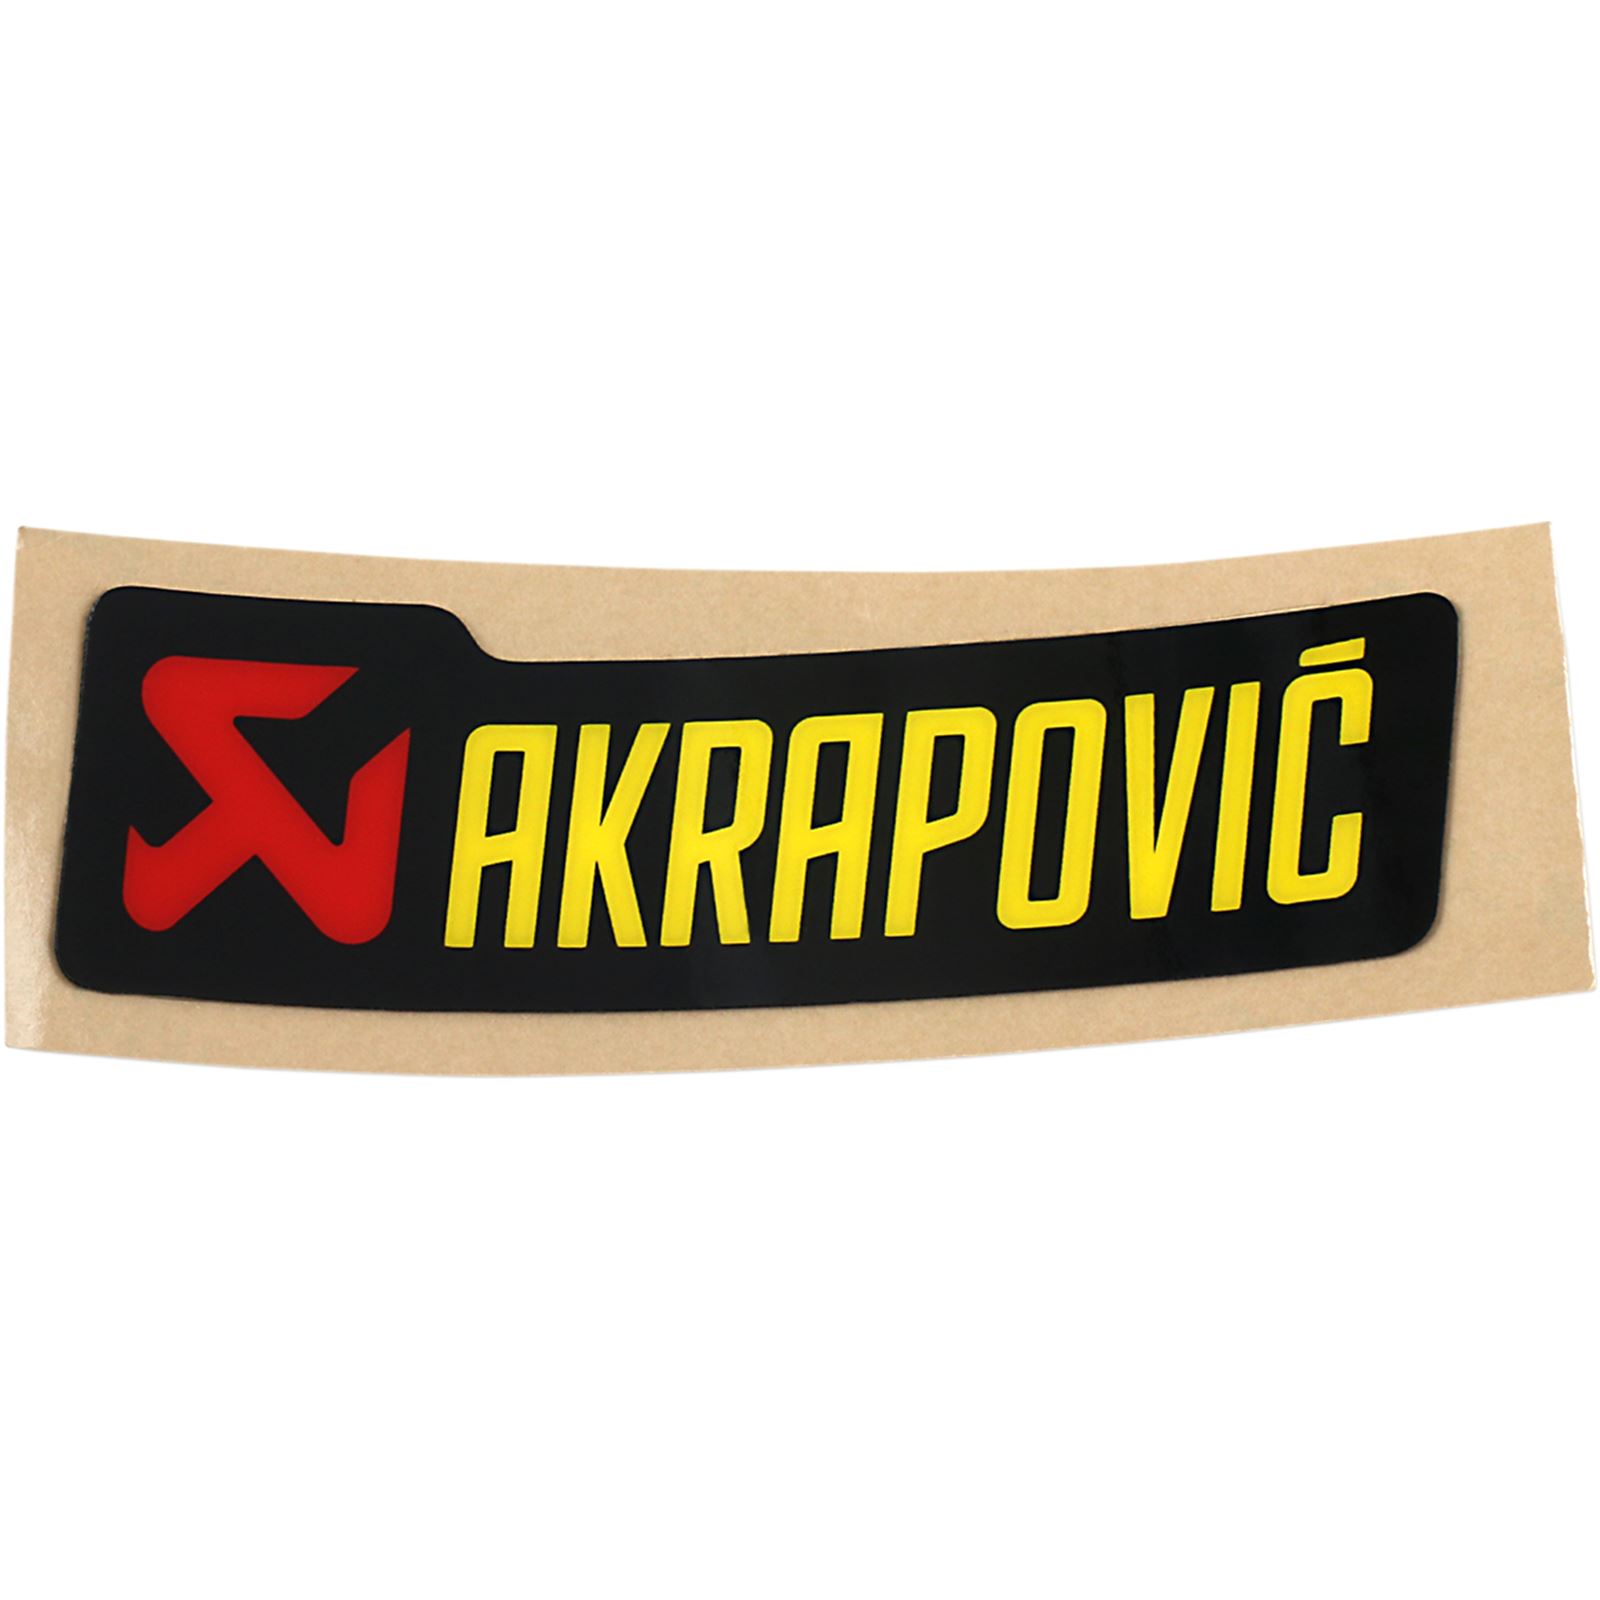 Akrapovic Replacement Sticker is at Motomentum at a great price! See our  Free Shipping & Rewards Points - Motorcycle, ATV / UTV & Powersports Parts